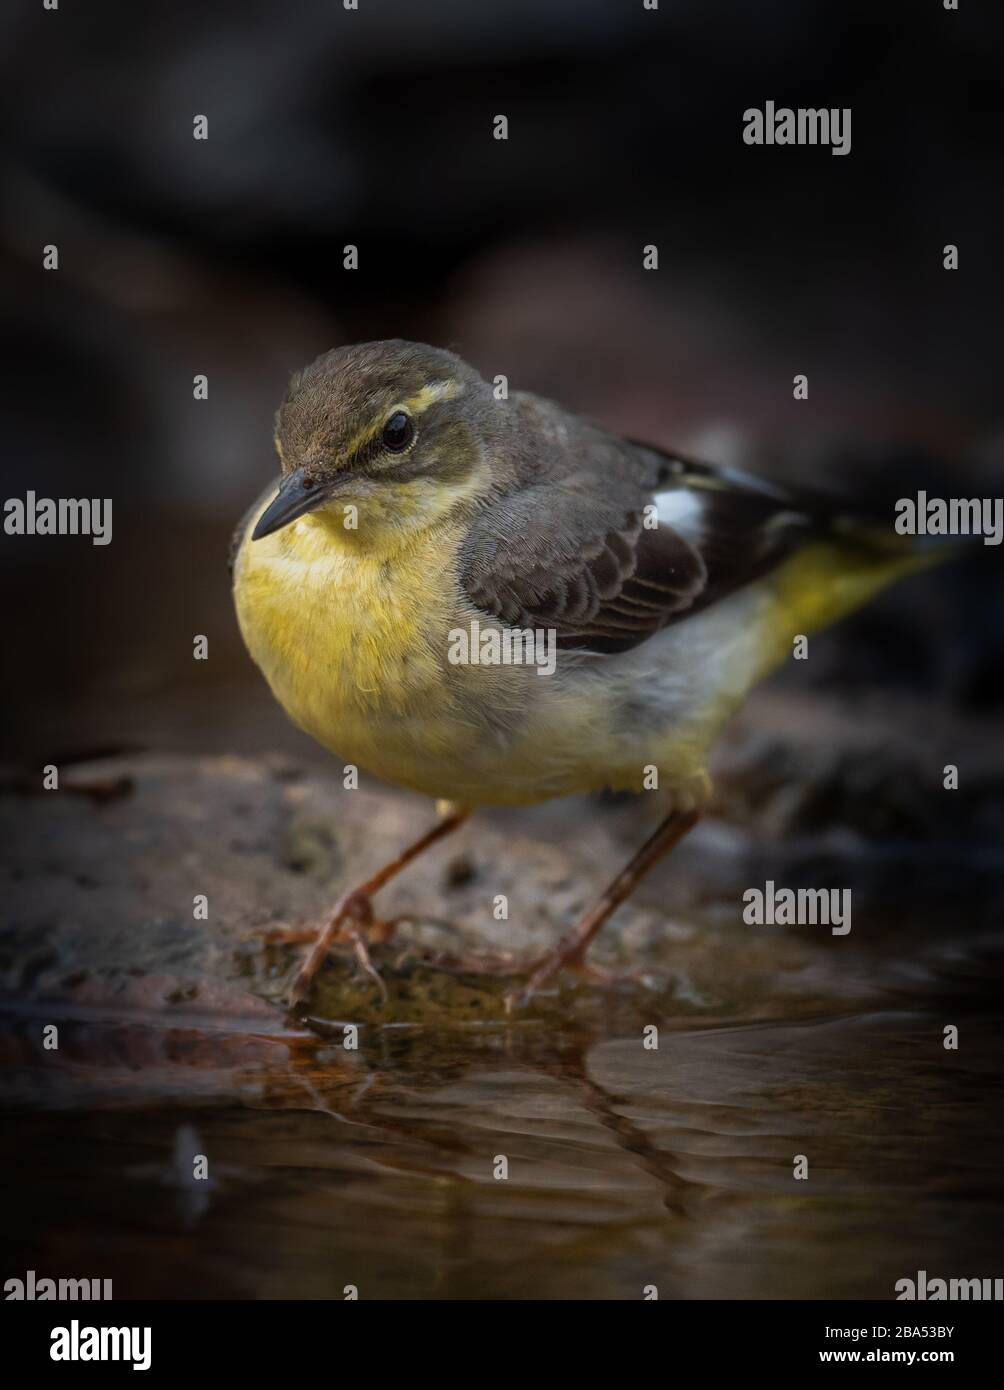 closeup shot of a yellow wag tail bird perched on a rock  Stock Photo